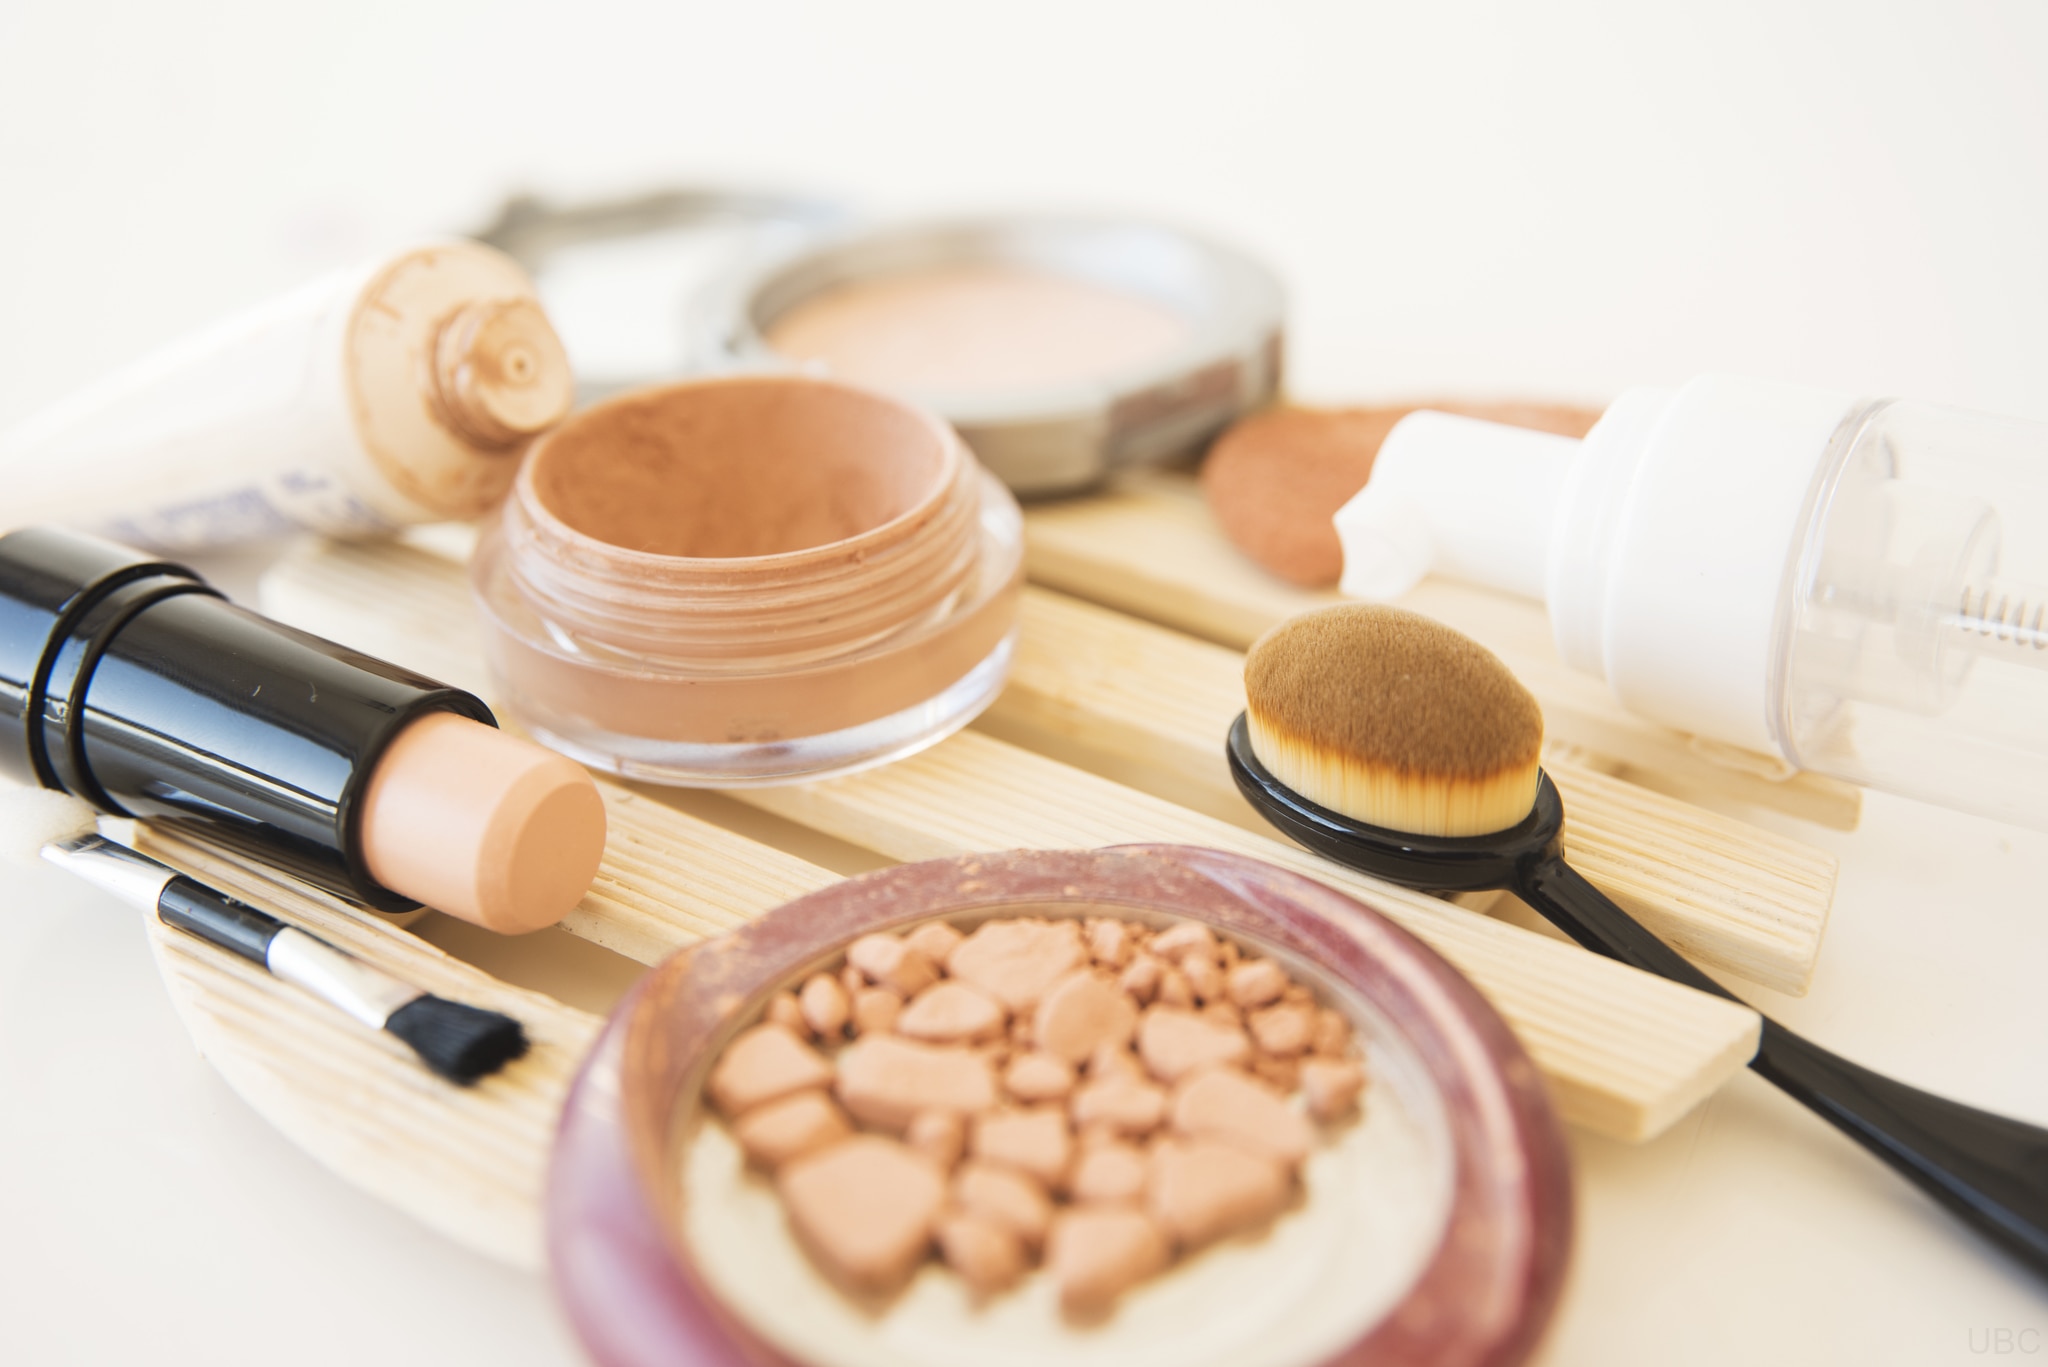 Contouring products